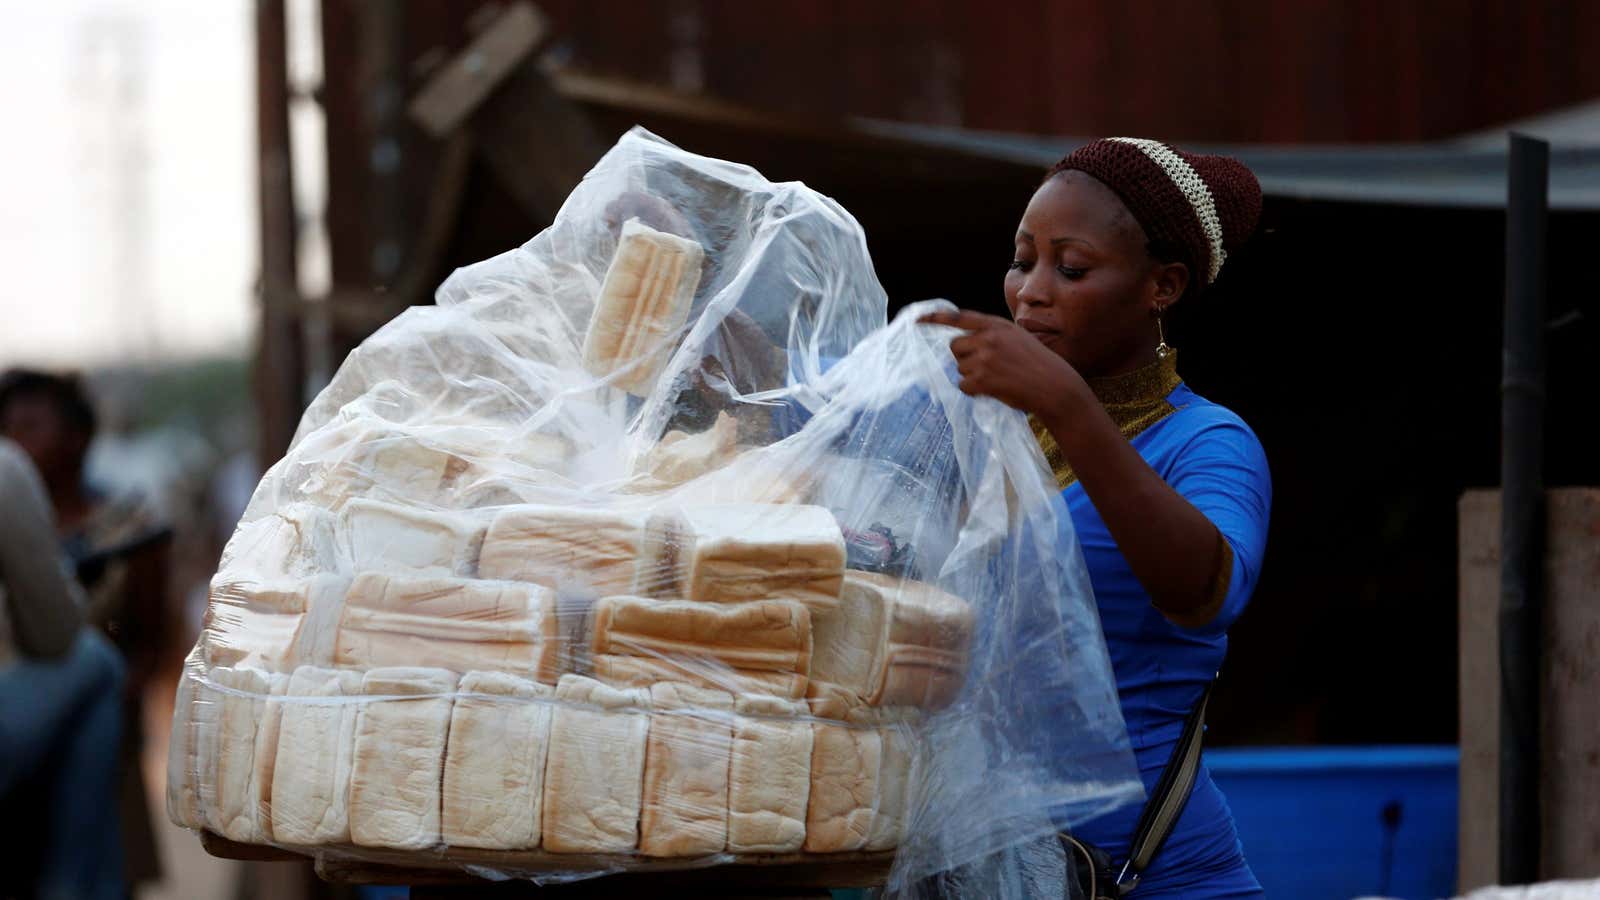 Nigerian bread was already becoming more expensive before the Russia-Ukraine war